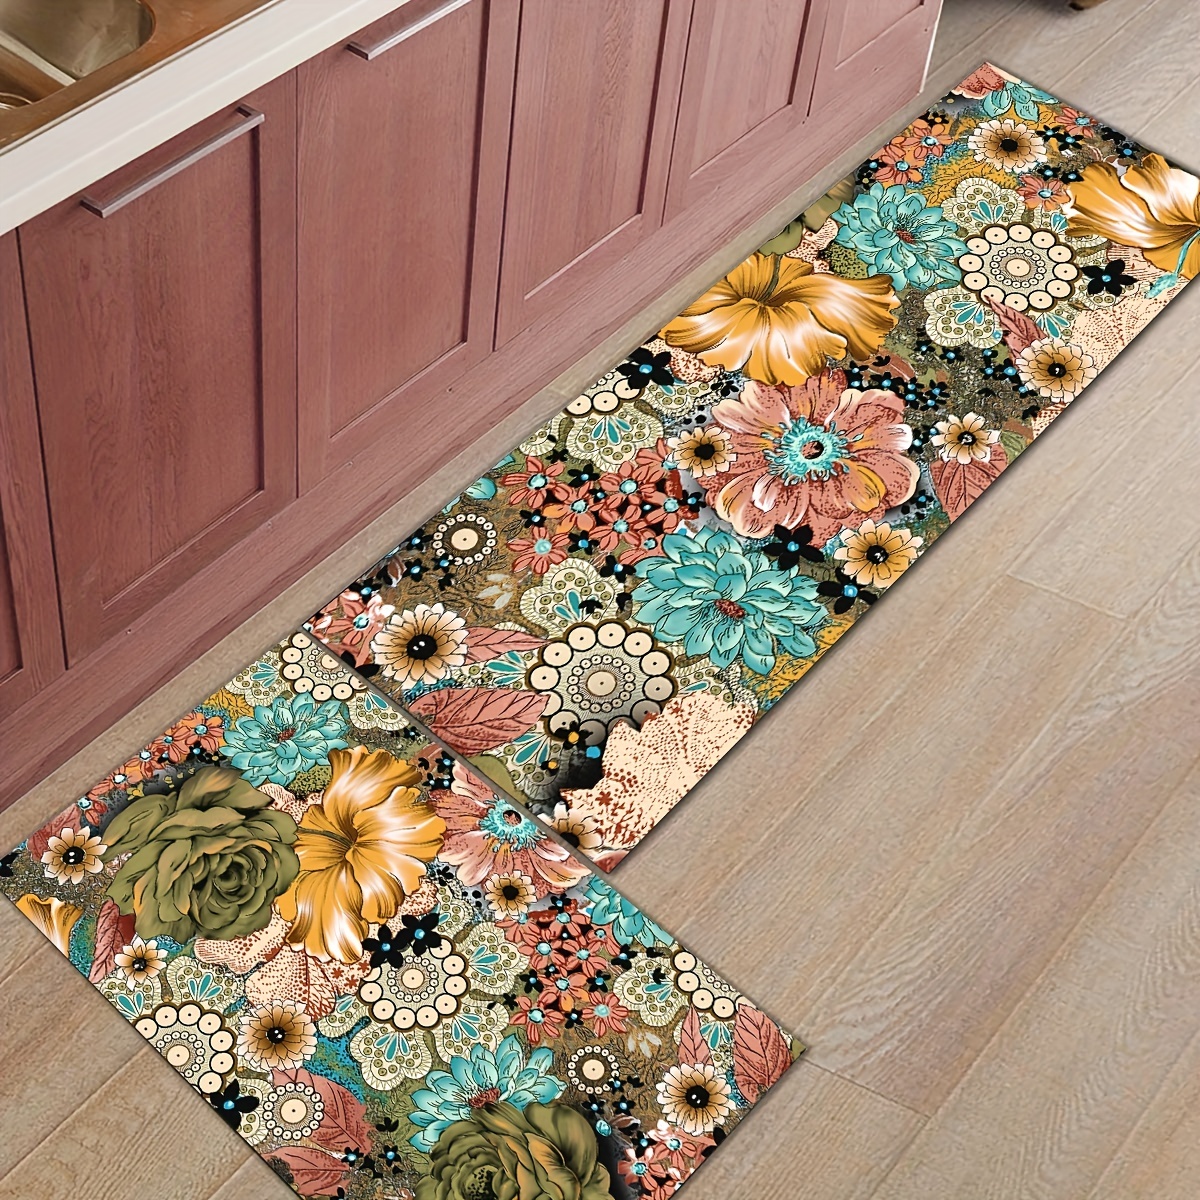 Boho Floral Kitchen Rug, Soft Cushioned Anti-fatigue Comfortable